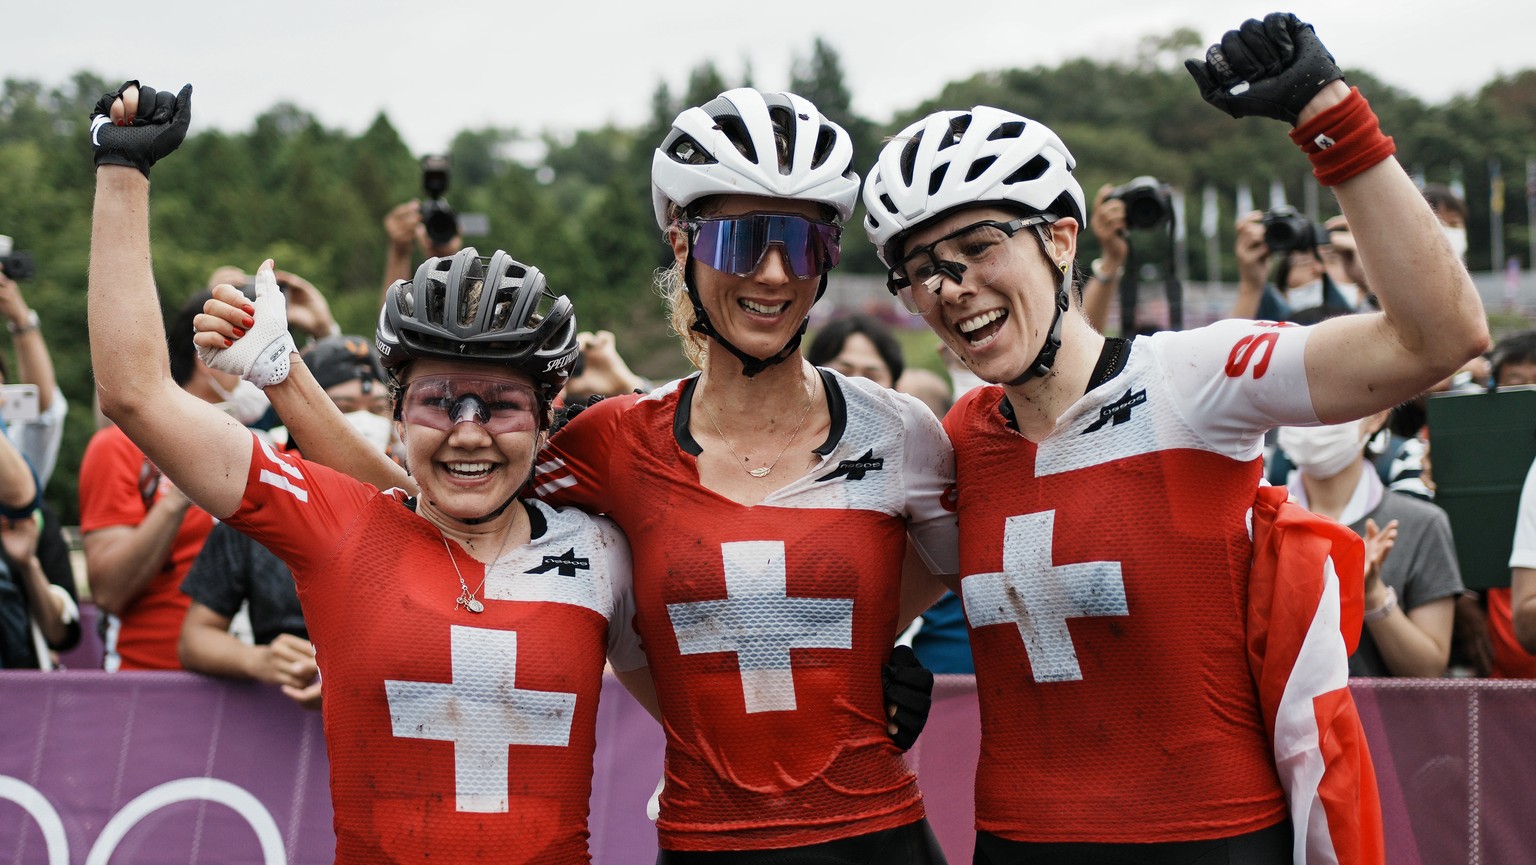 Switzerland&#039;s gold medalist Jolanda Neff center, silver medalist Sina Frei, left, and bronze medalist Linda Indergand (19) celebrate at the finish line after sweeping the podium during the women& ...